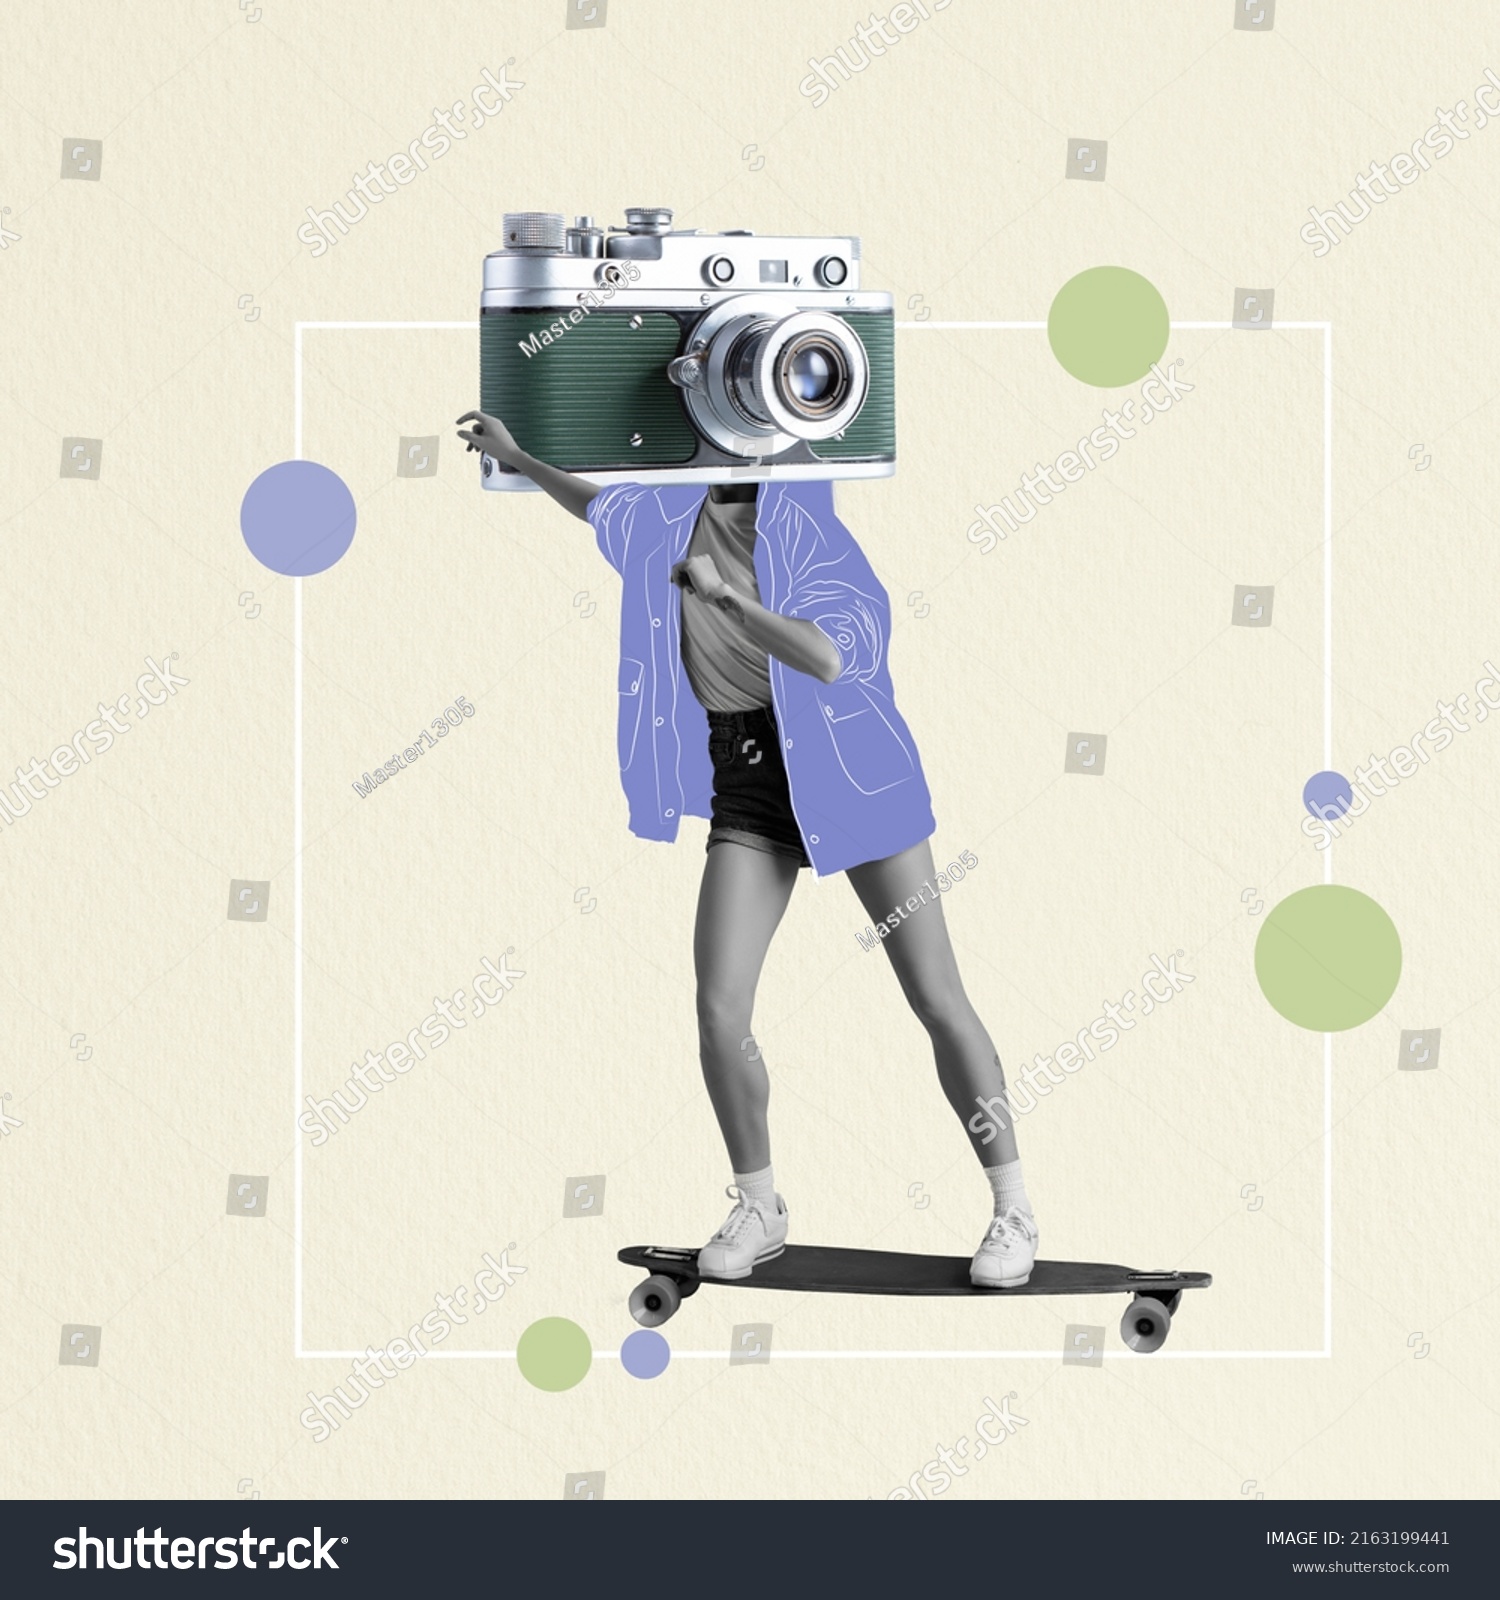 Contemporary art collage. Stylish young girl with retro camera head moving on skate. Reaching goals. Vintage style. Concept of surrealism, creativity, inspiration. Modern artwork. Youth culture #2163199441